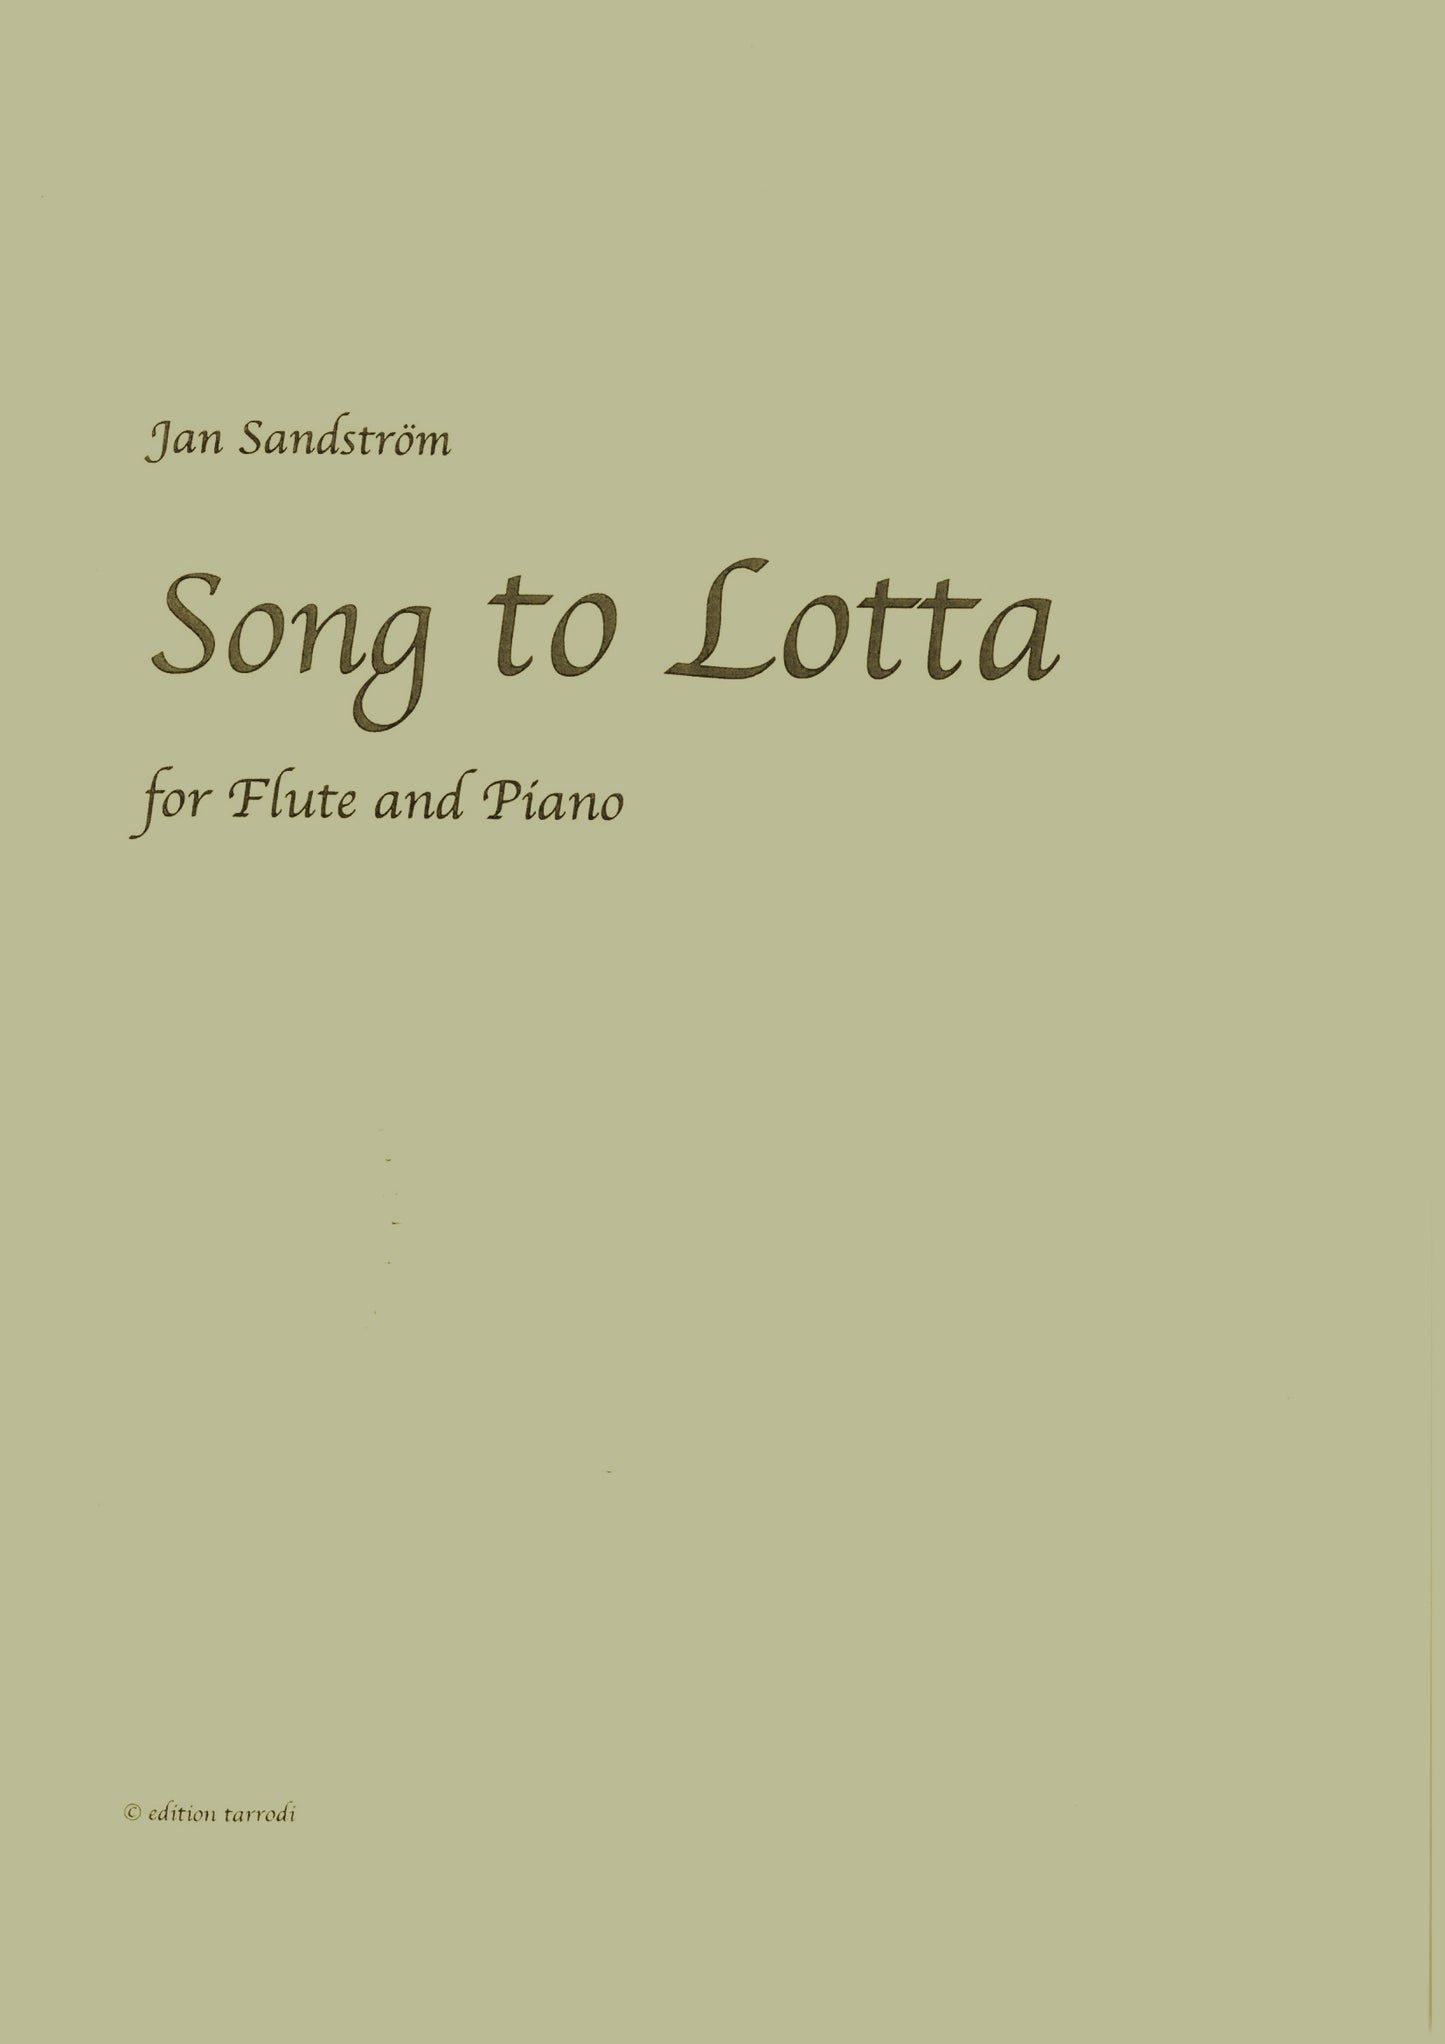 Jan Sandström - Song to Lotta for Flute and Piano